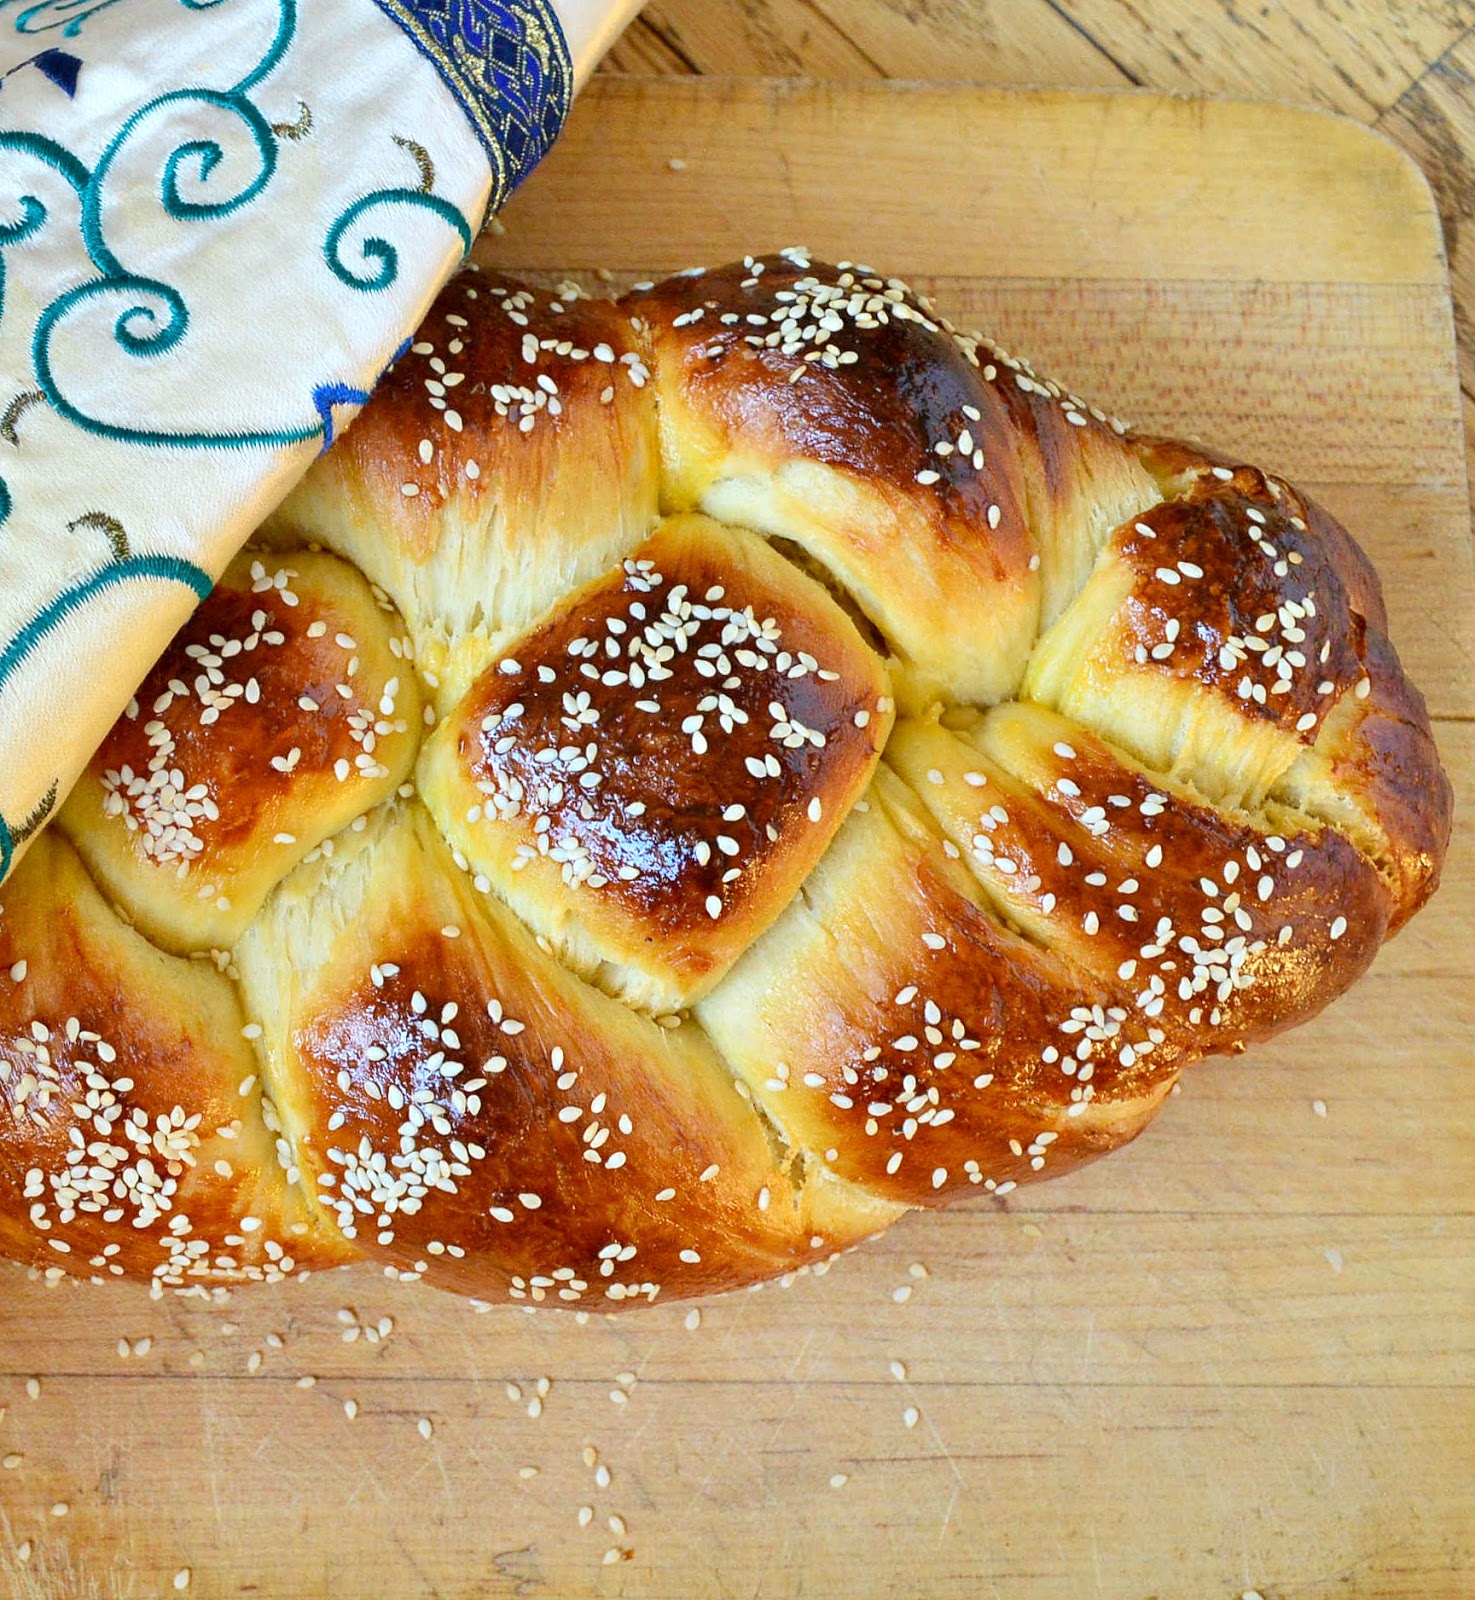 This is How I Cook: Challah Bread (My Favorite Friday Treat)